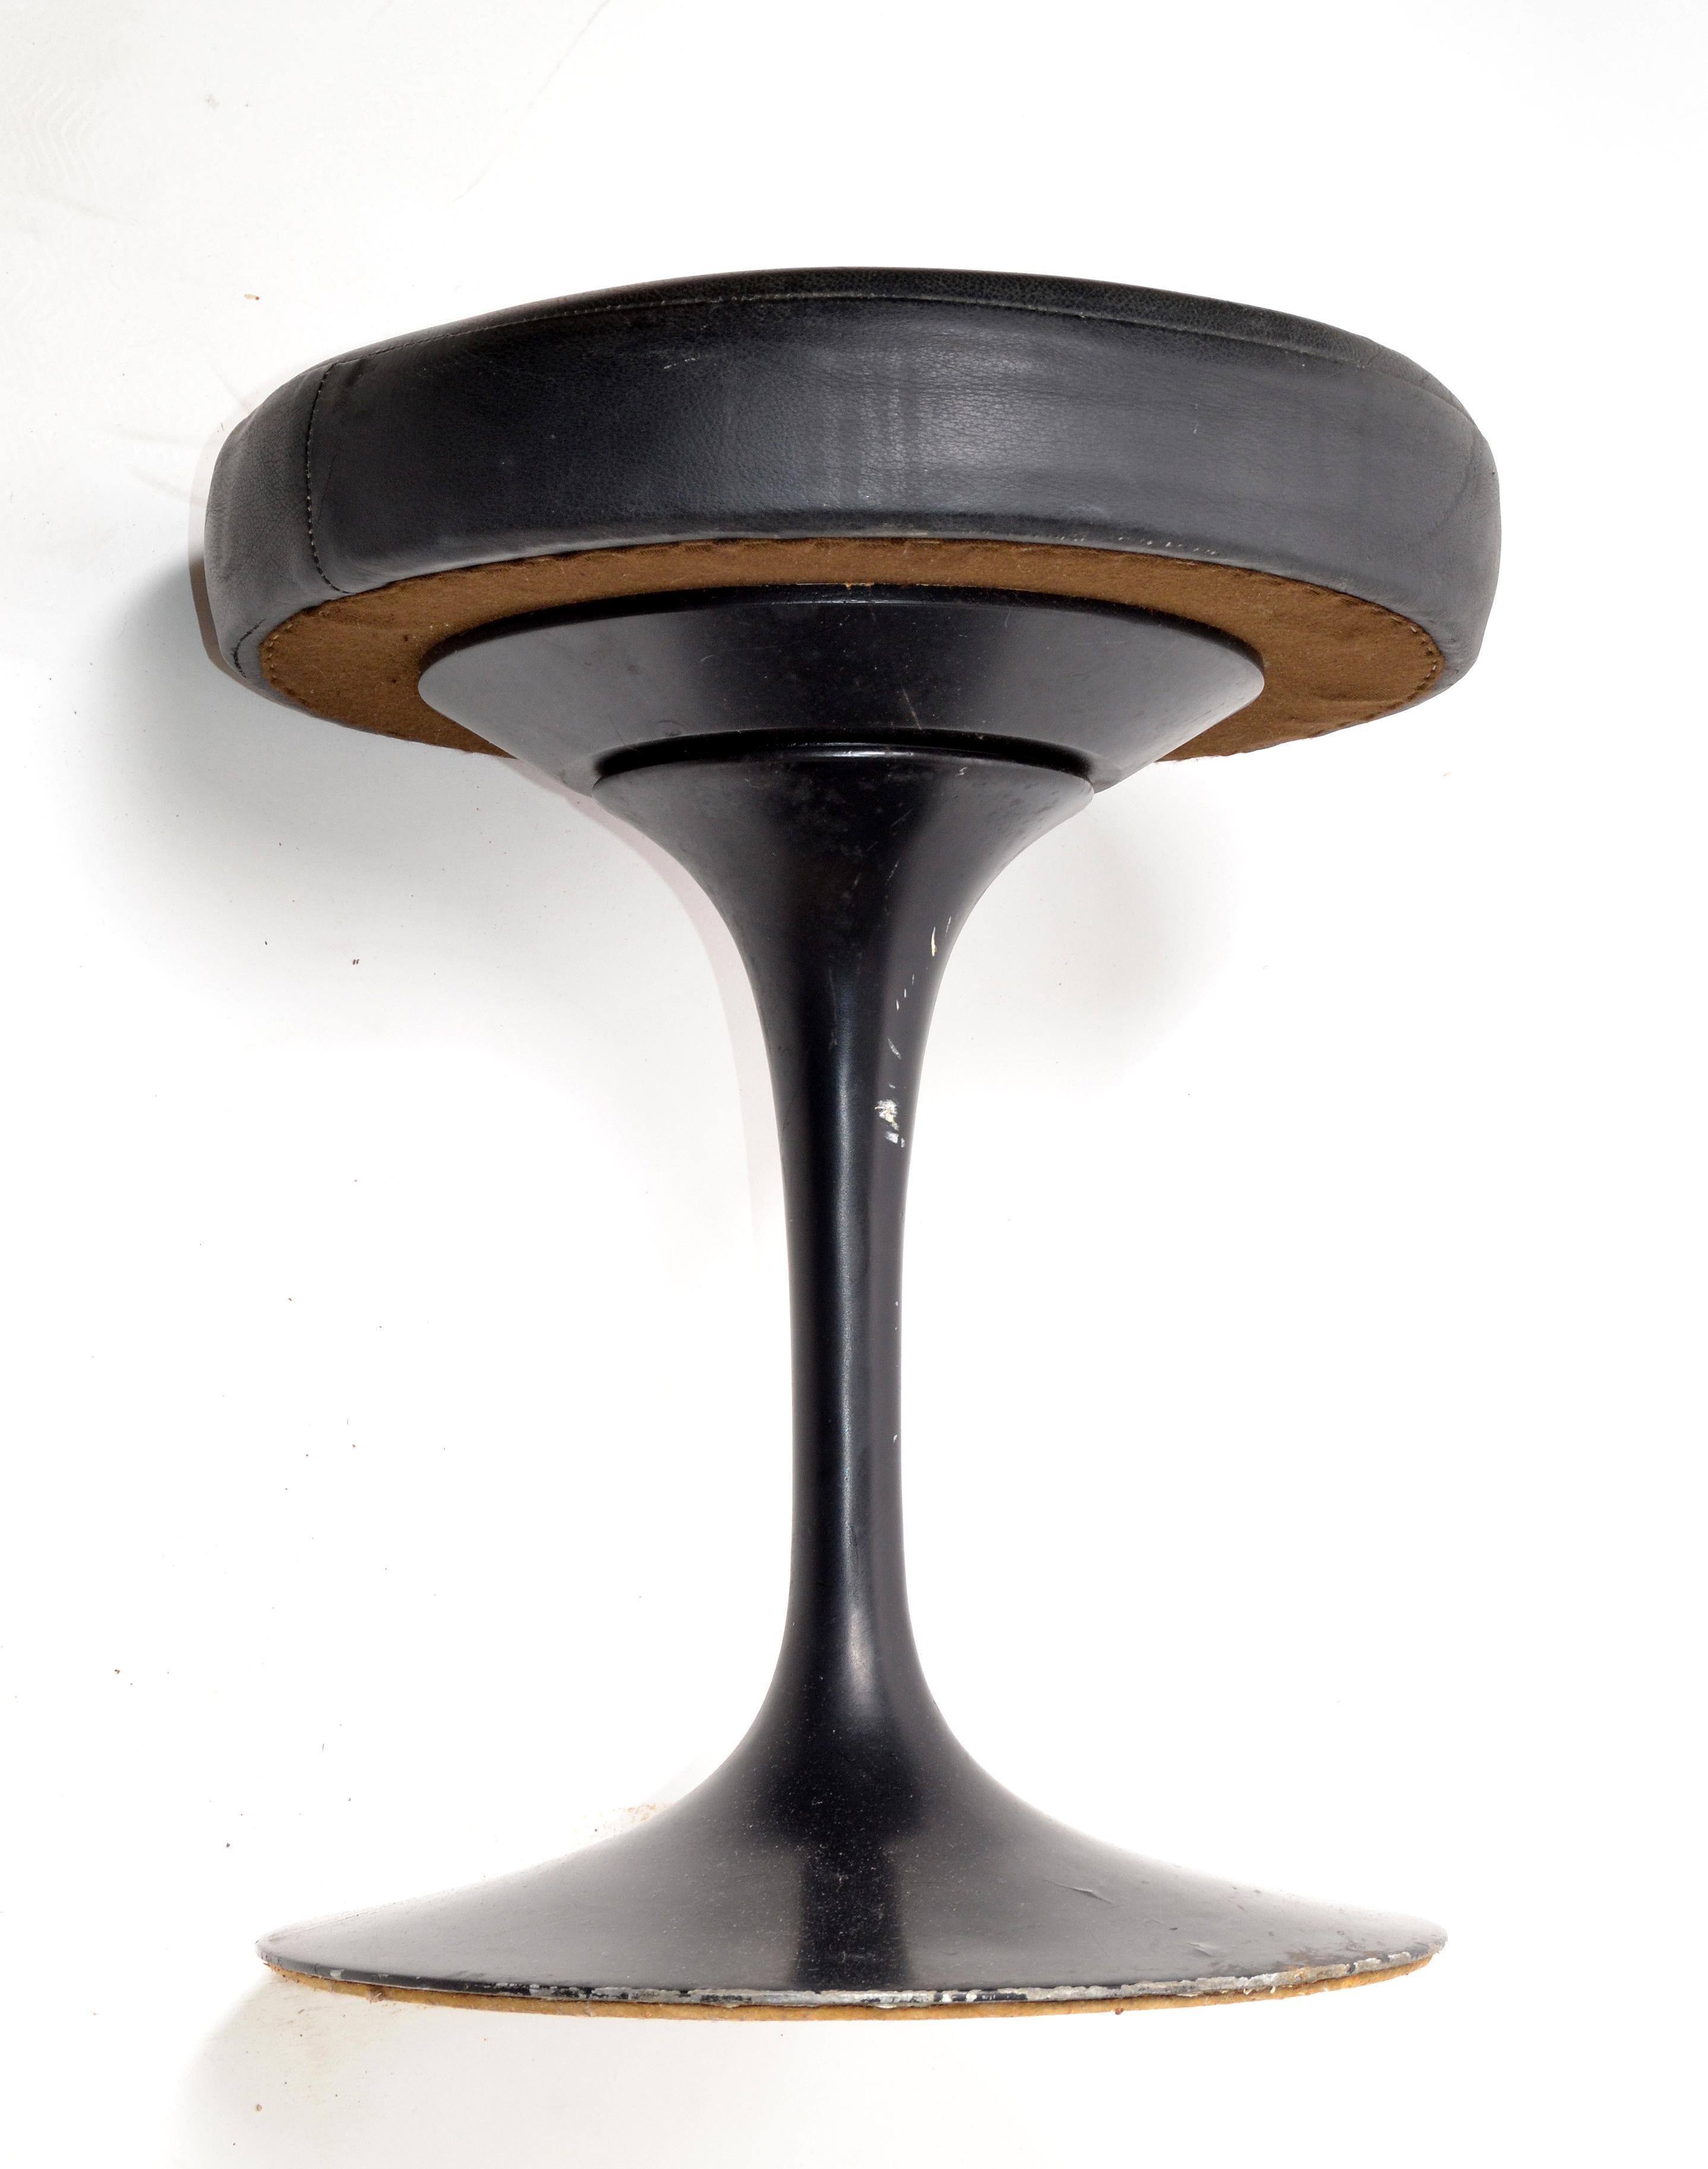 Knoll Associates Tulip Saarinen Stool Original Black Leather Upholstery, 1950 In Fair Condition For Sale In Miami, FL